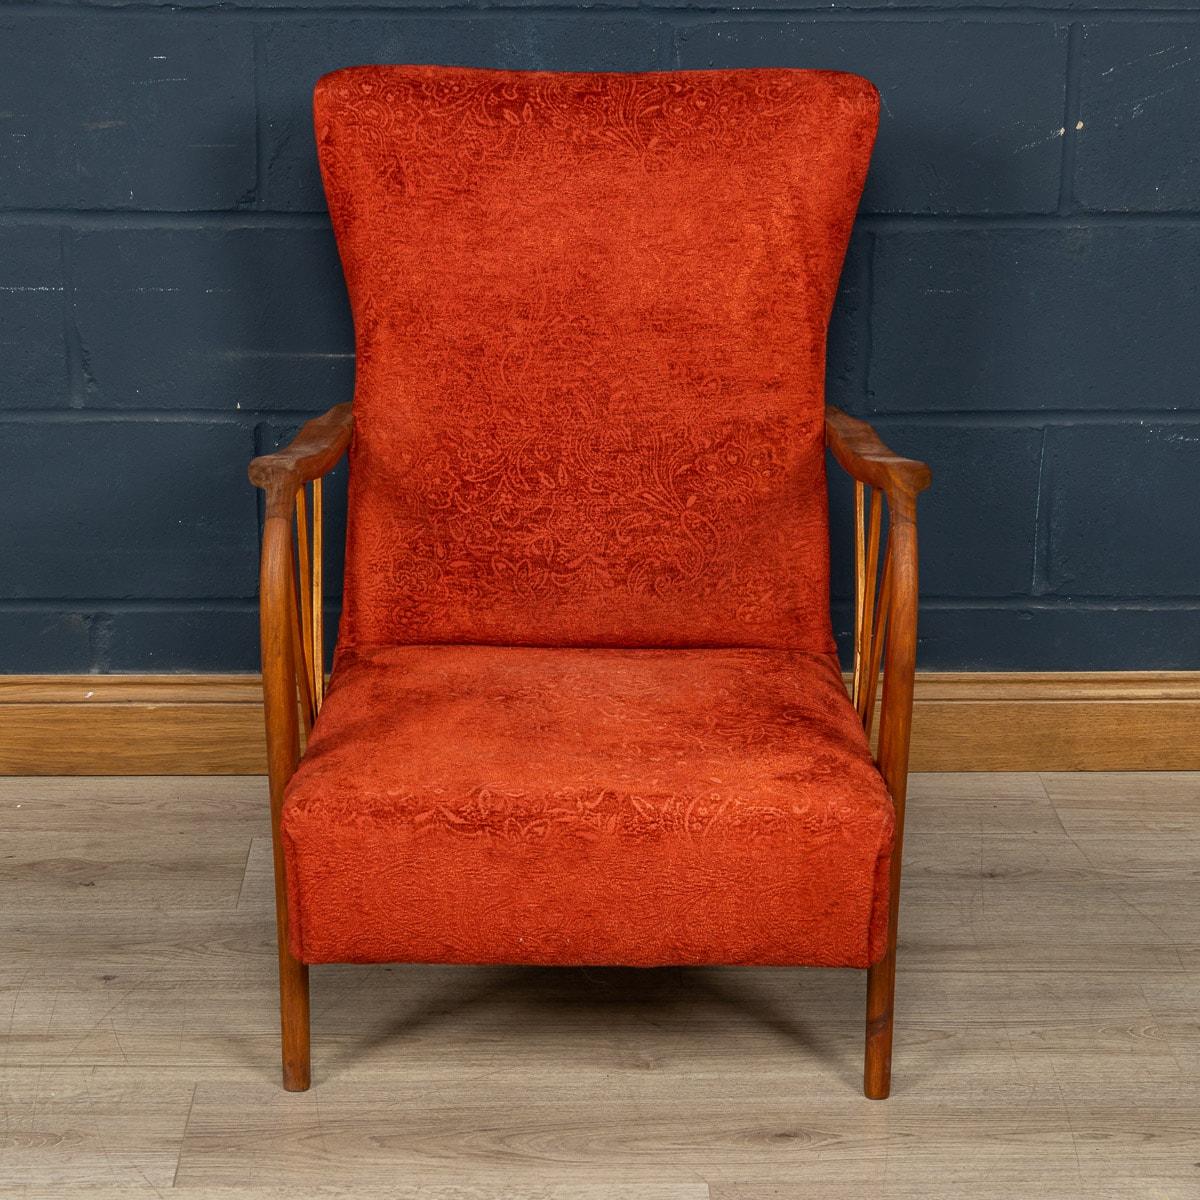 A lovely and very rare armchair or easy chair made in Italy in the middle part of the 20th century. The chair has possibly been reupholstered in a sumptuous red floral fabric, in keeping with the style and age of the chair. What really sets this